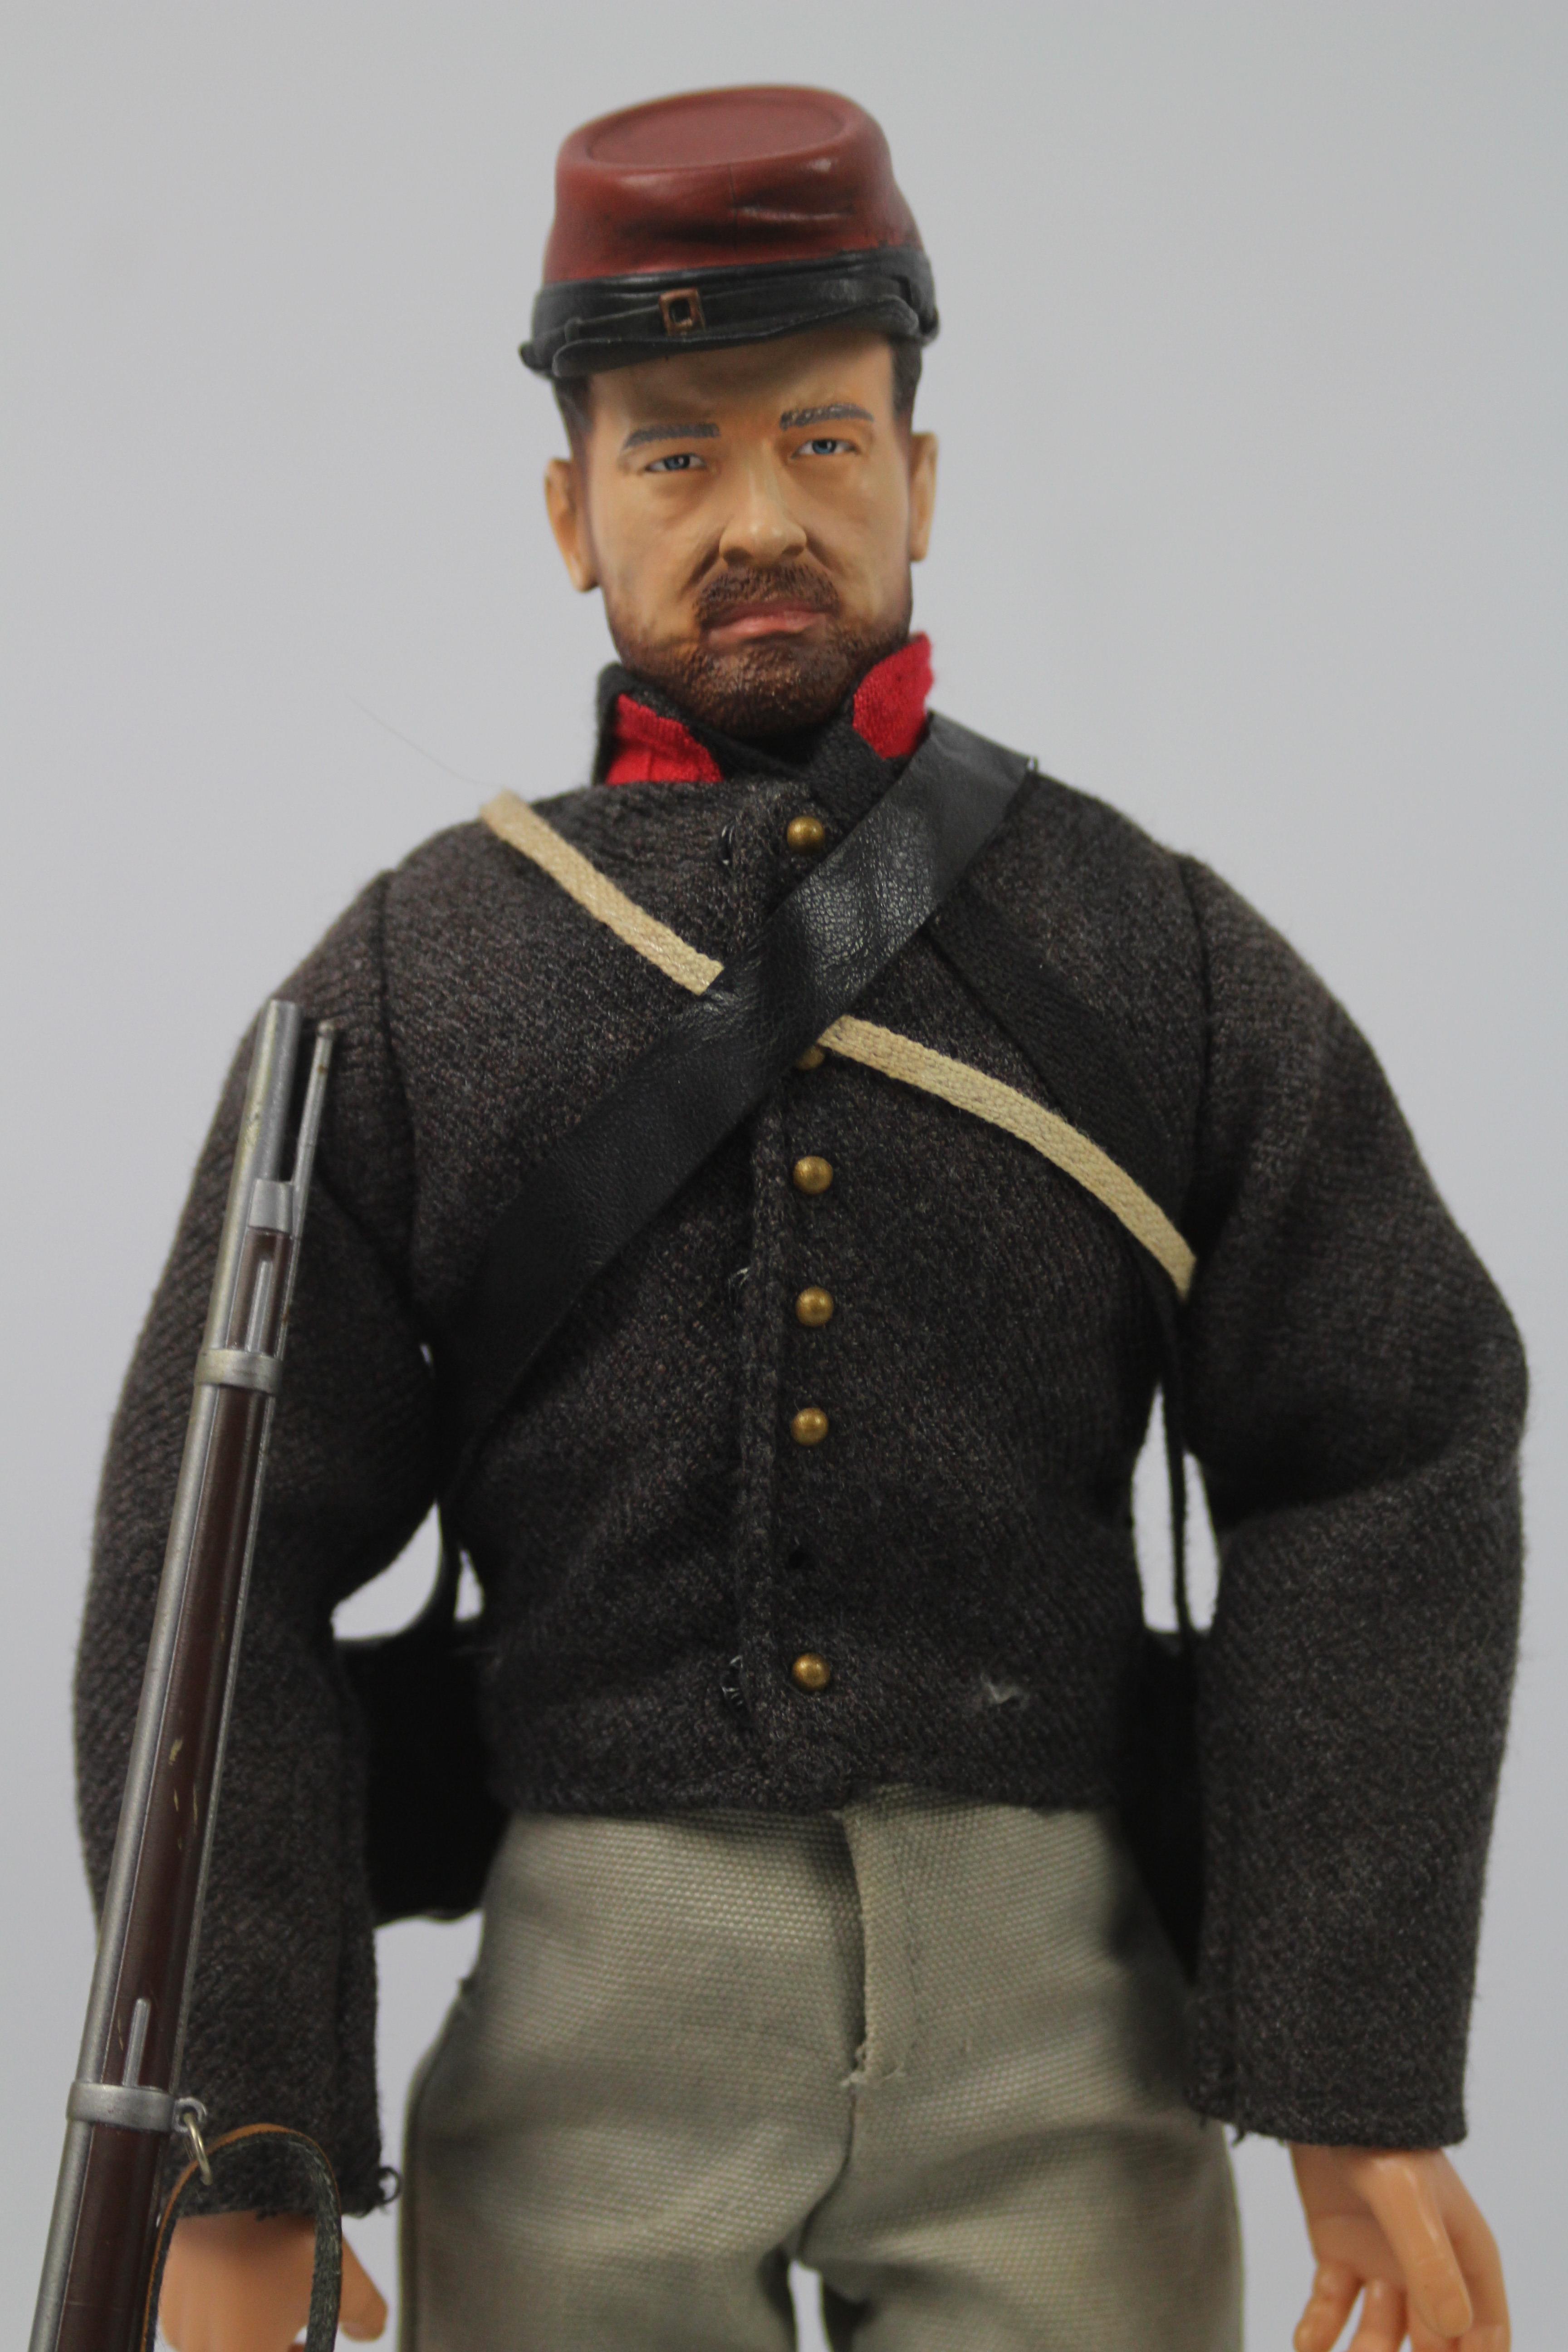 Dragon - An unboxed Dragon Models American Civil War Confederate 12" action figure. - Image 2 of 5